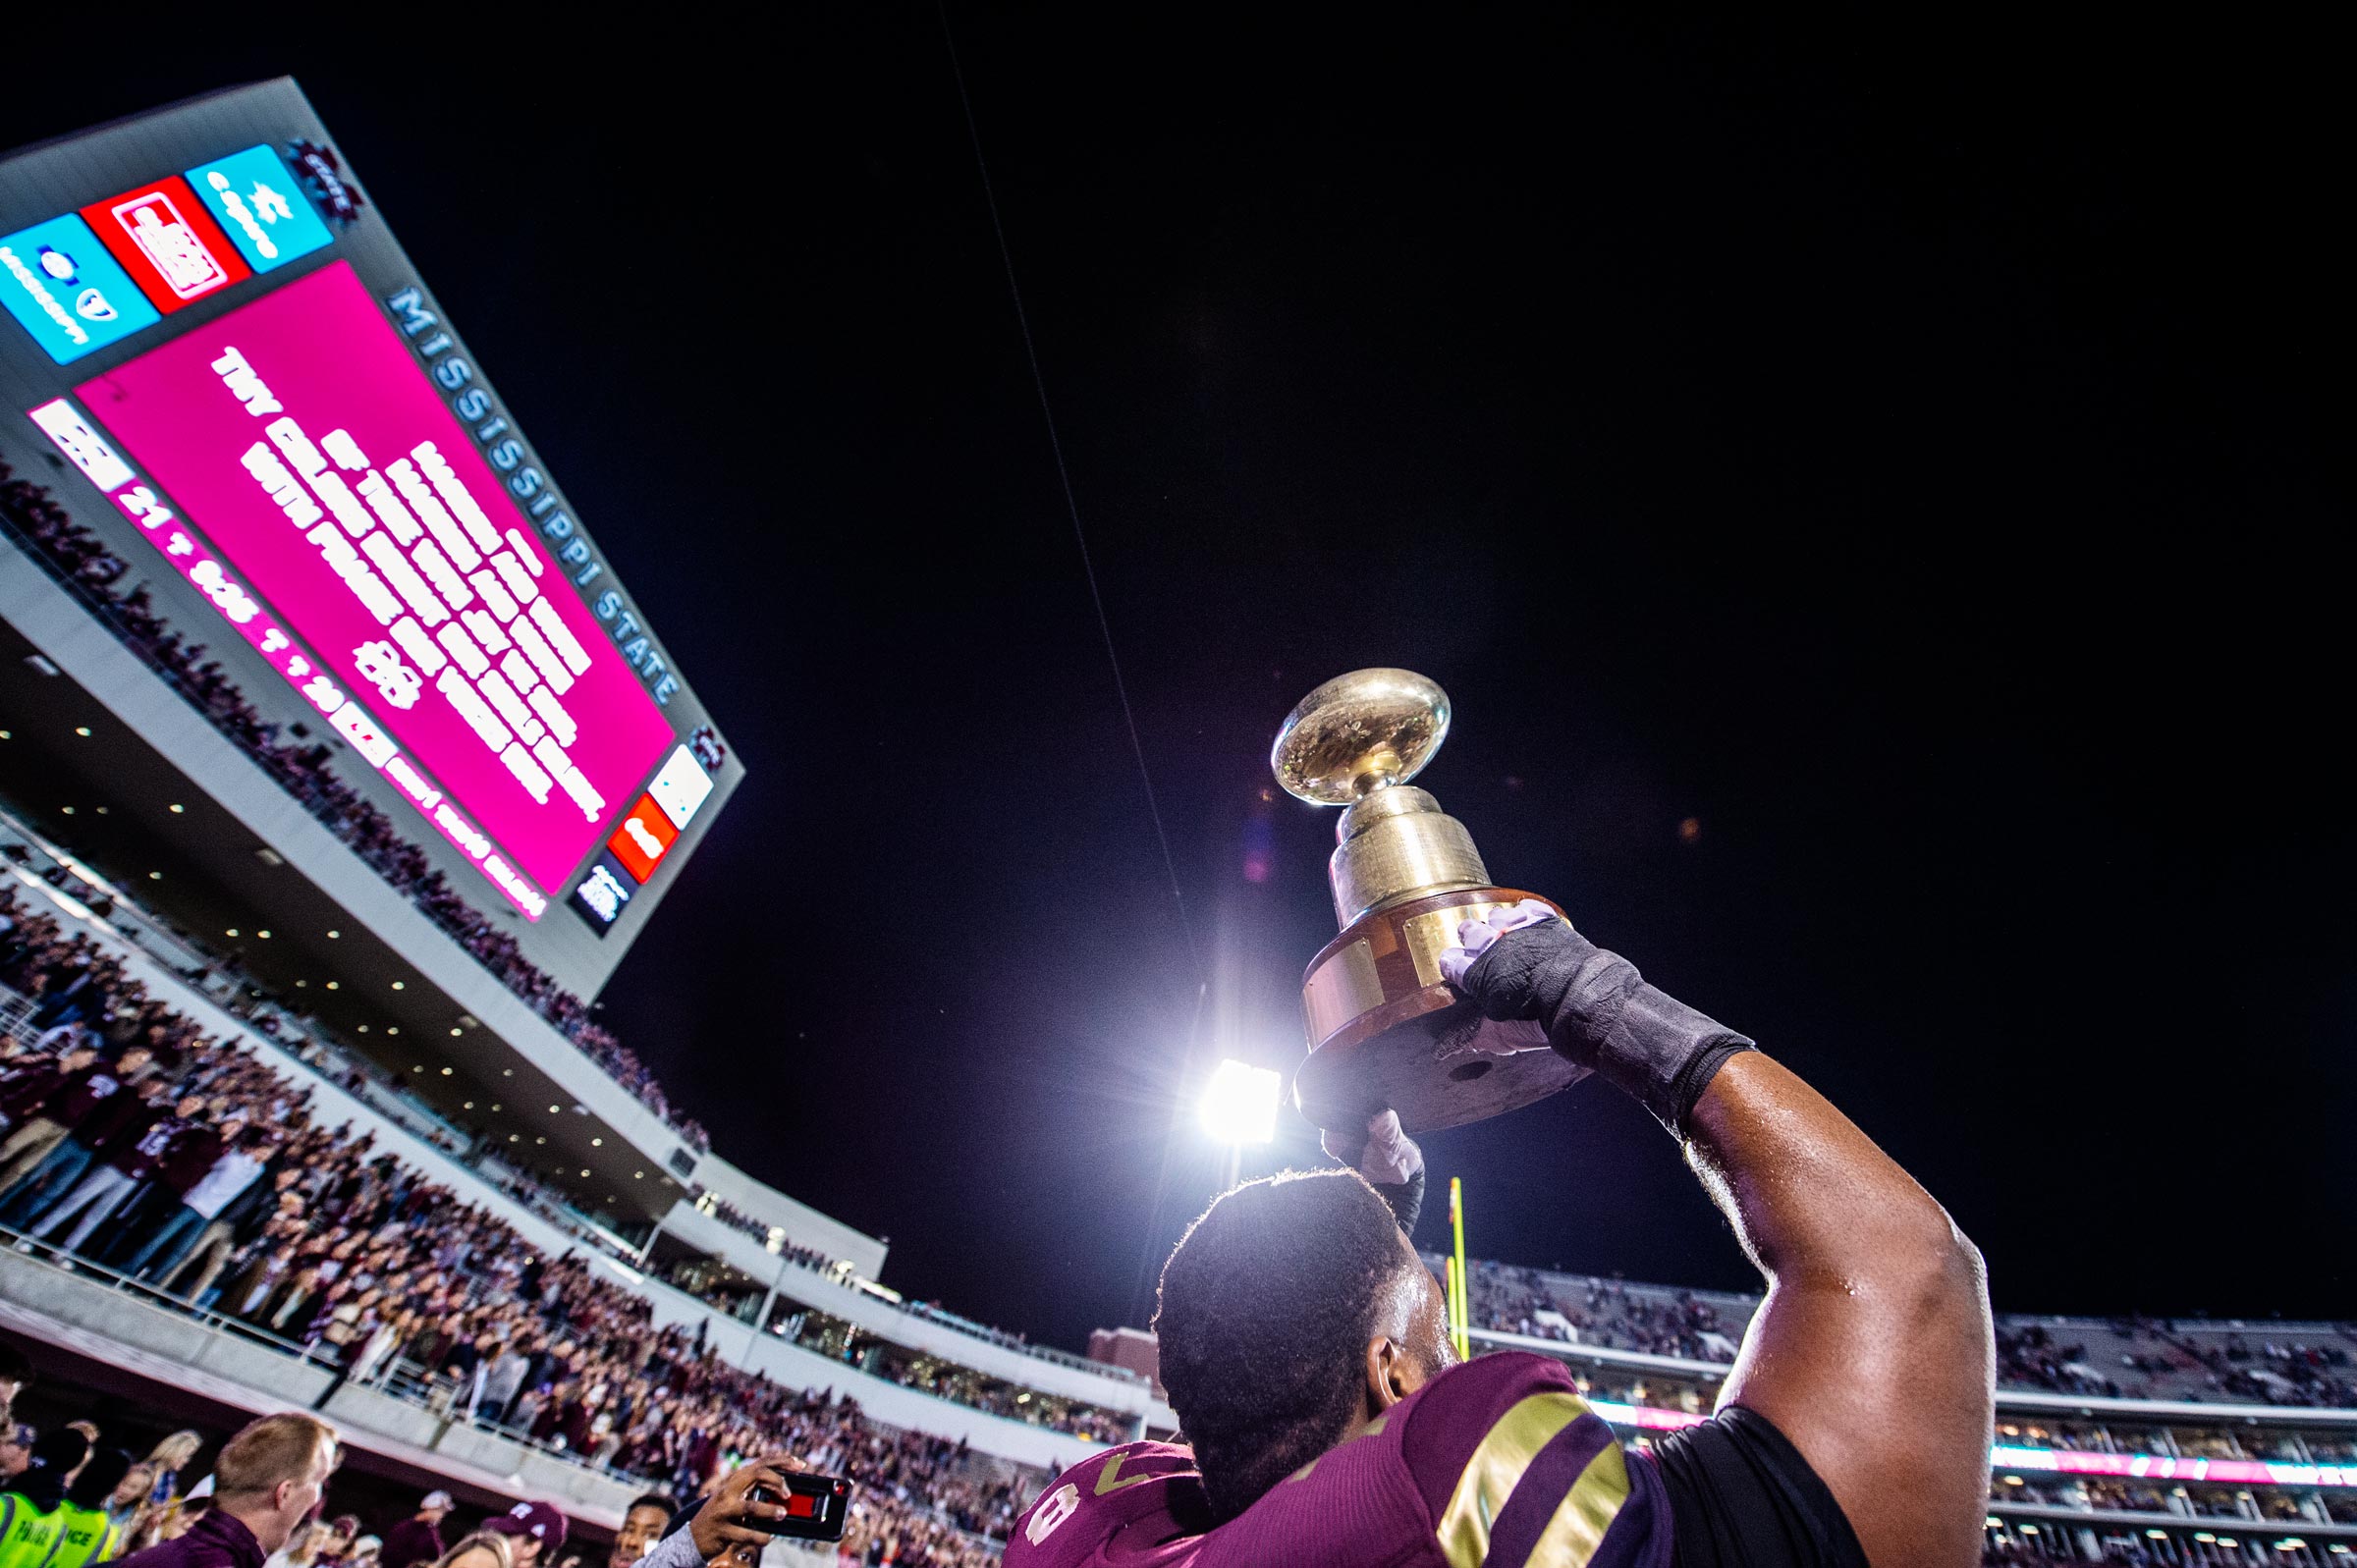 With the nighttime Davis Wade Stadium wrapping around him, an MSU player holds the Egg Bowl trophy high over his head in celebration